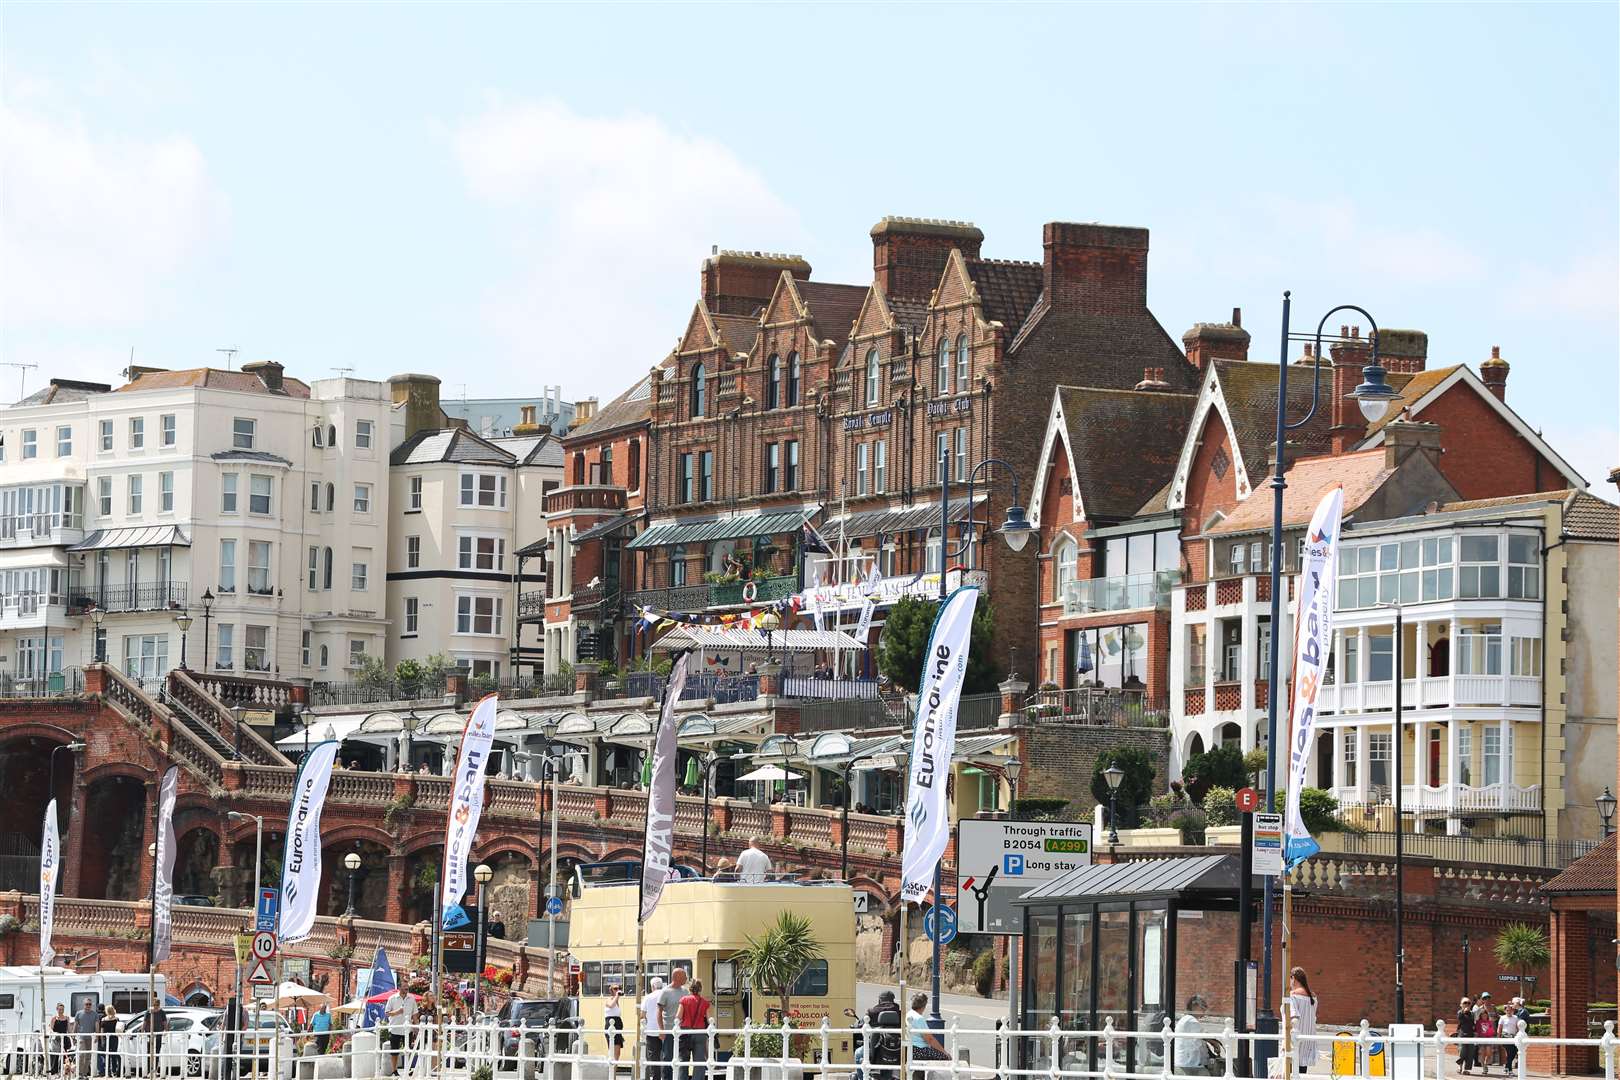 Boats from across the UK, Belgium, France and Netherlands have arrived for Ramsgate Week regatta. Picture: Karen Cox/Ramsgate Week (14121578)